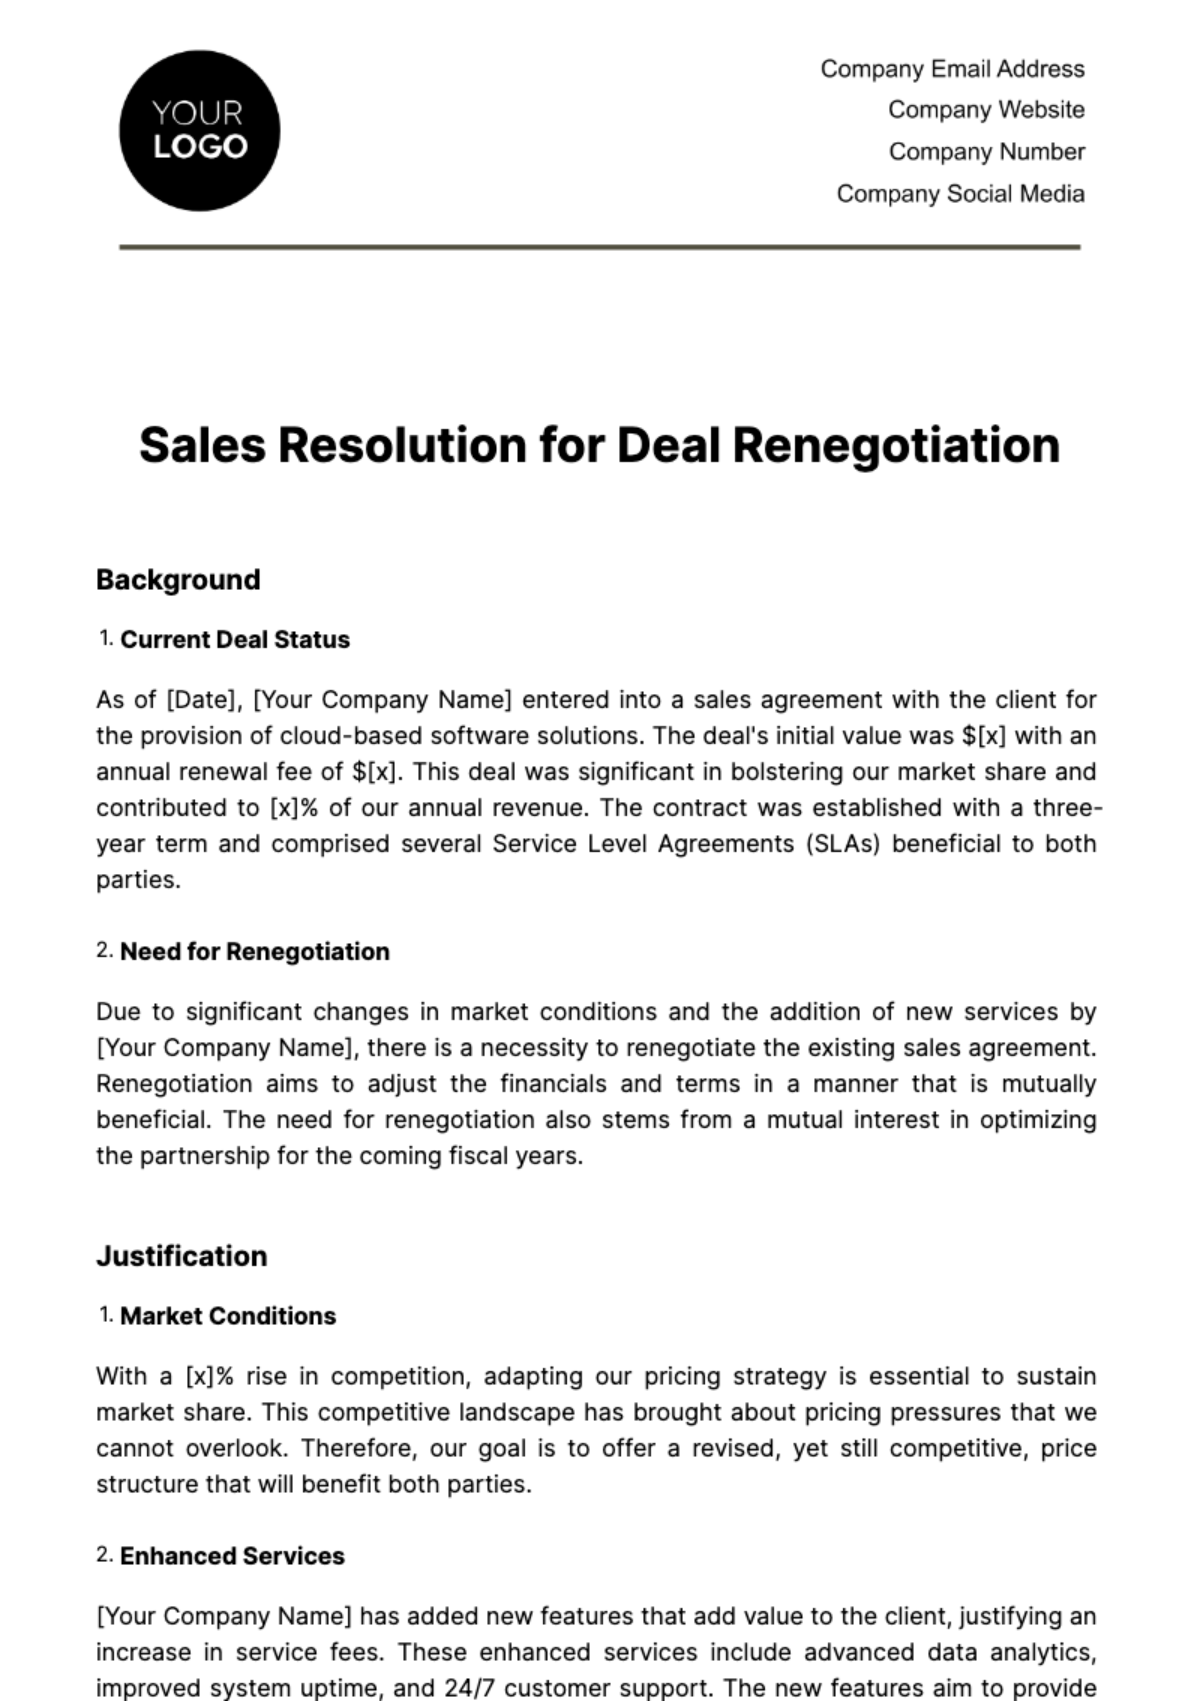 Free Sales Resolution for Deal Renegotiation Template